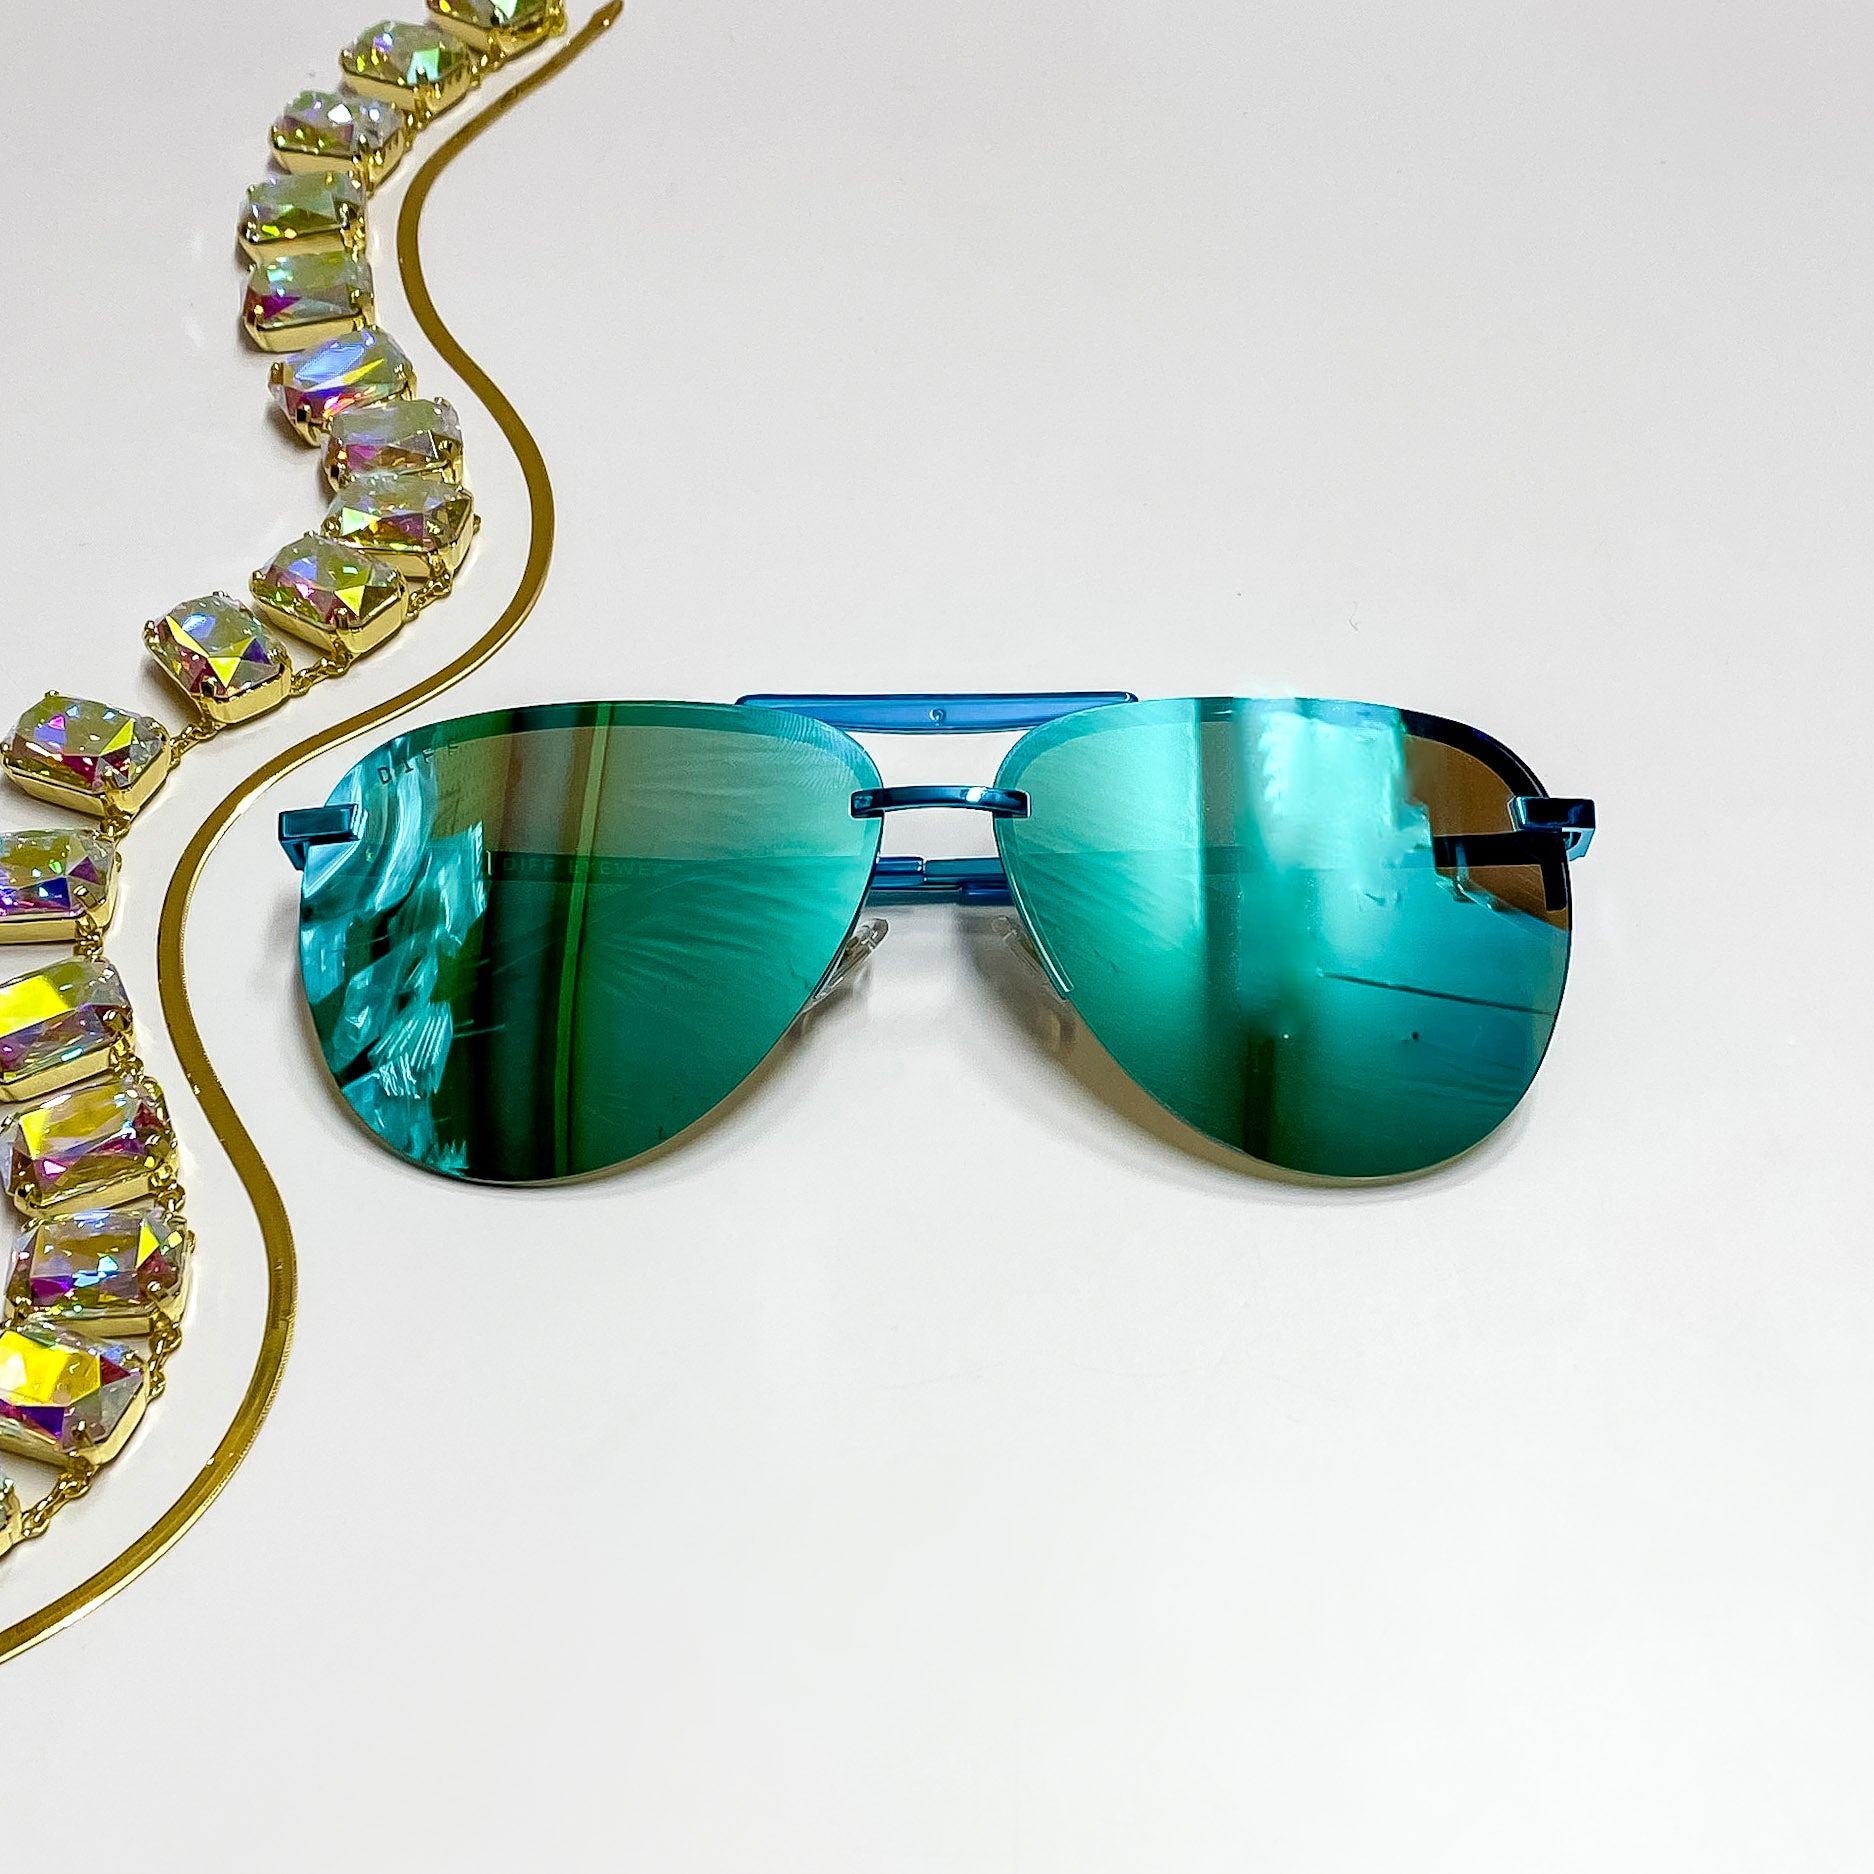 DIFF | Tahoe Aviator Sunglasses in Turquoise Metallic Polarized - Giddy Up Glamour Boutique